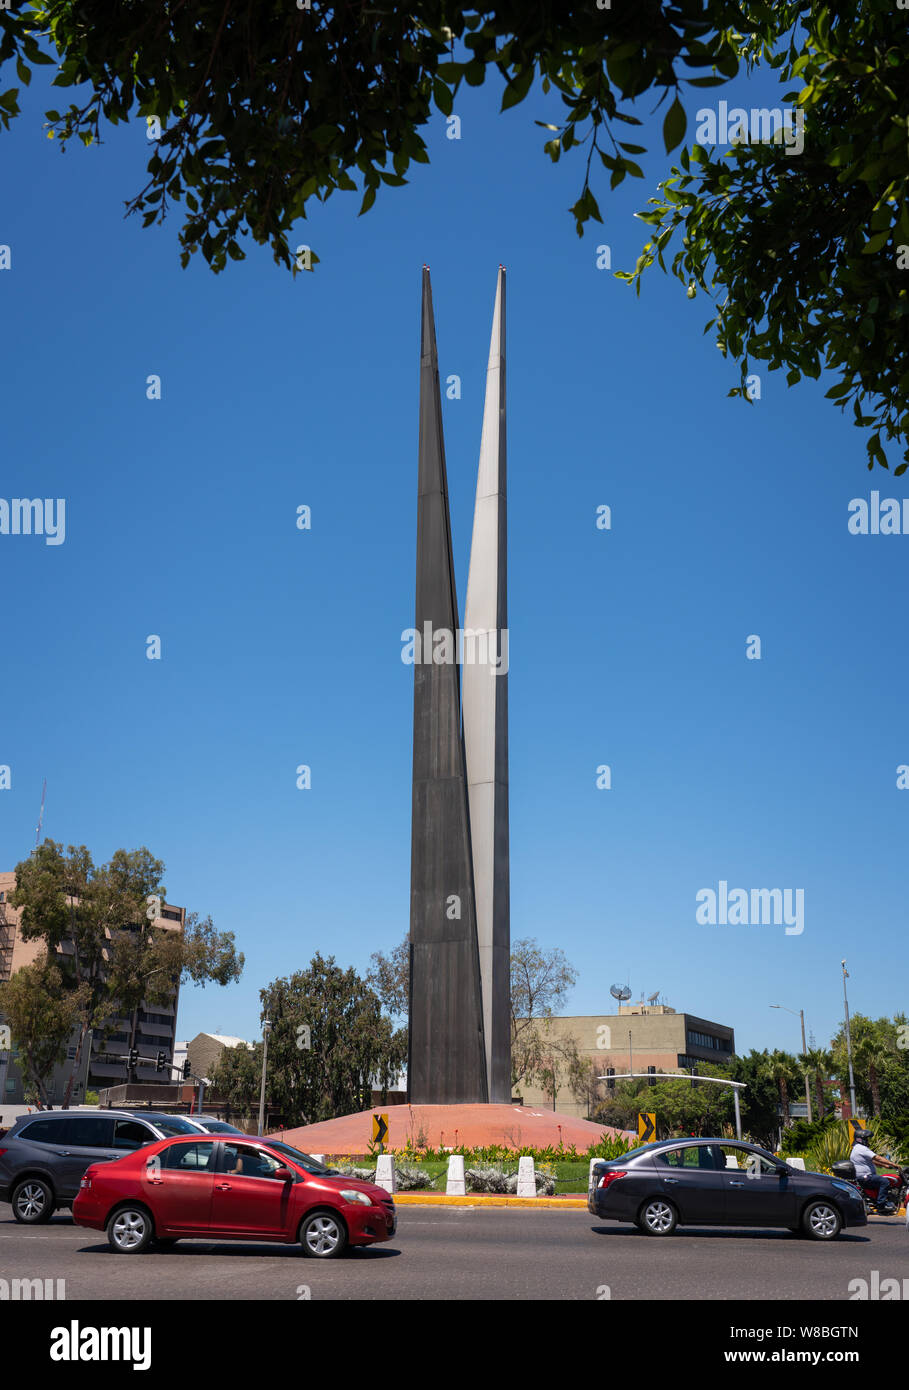 Glorieta Independencia-Monument, a sculpture installed in a traffic roundabout in Tijuana, Mexico. Stock Photo